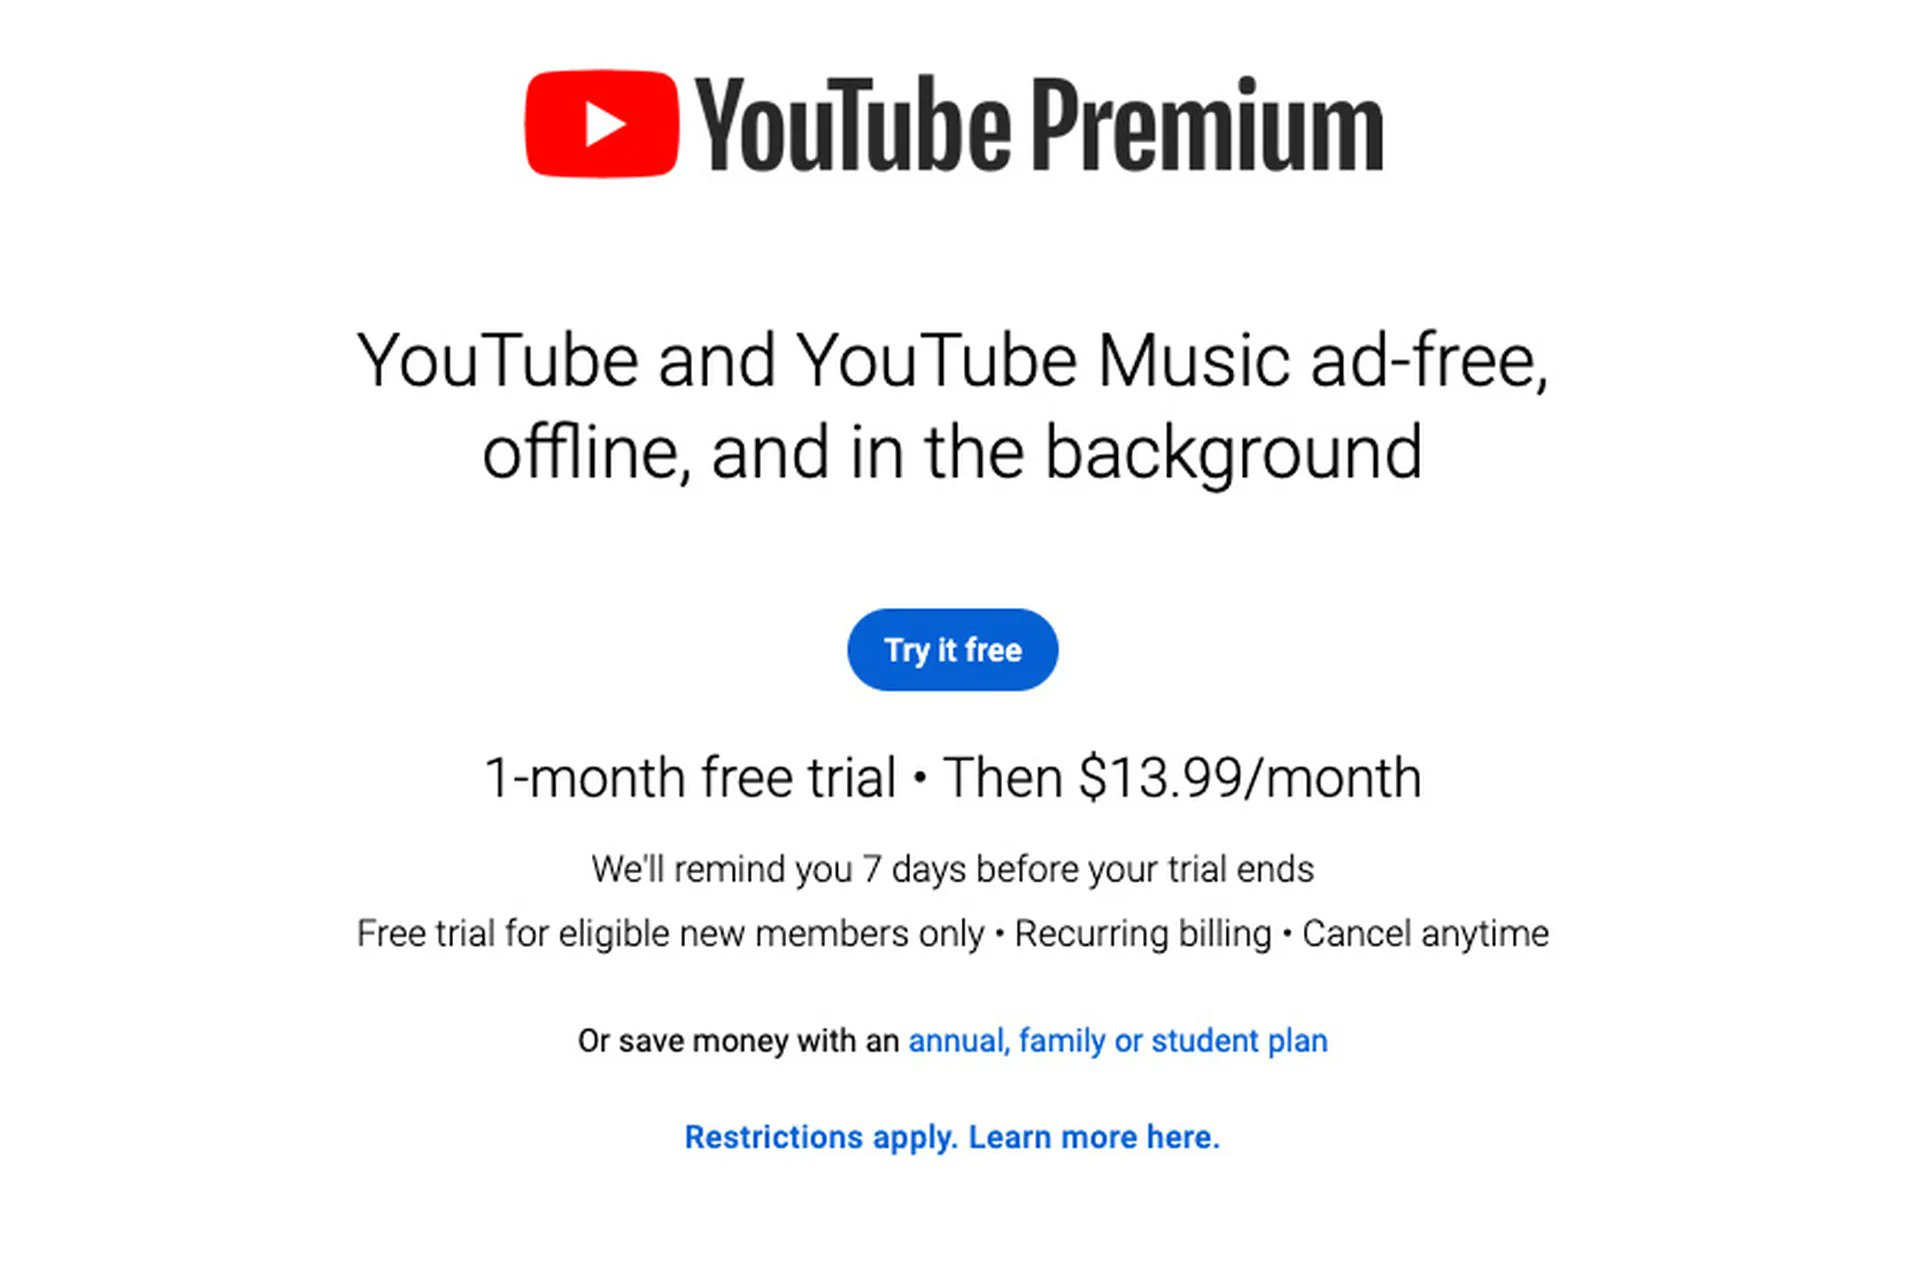 YouTube Premium Price Stealthily Increases to $14 per Month